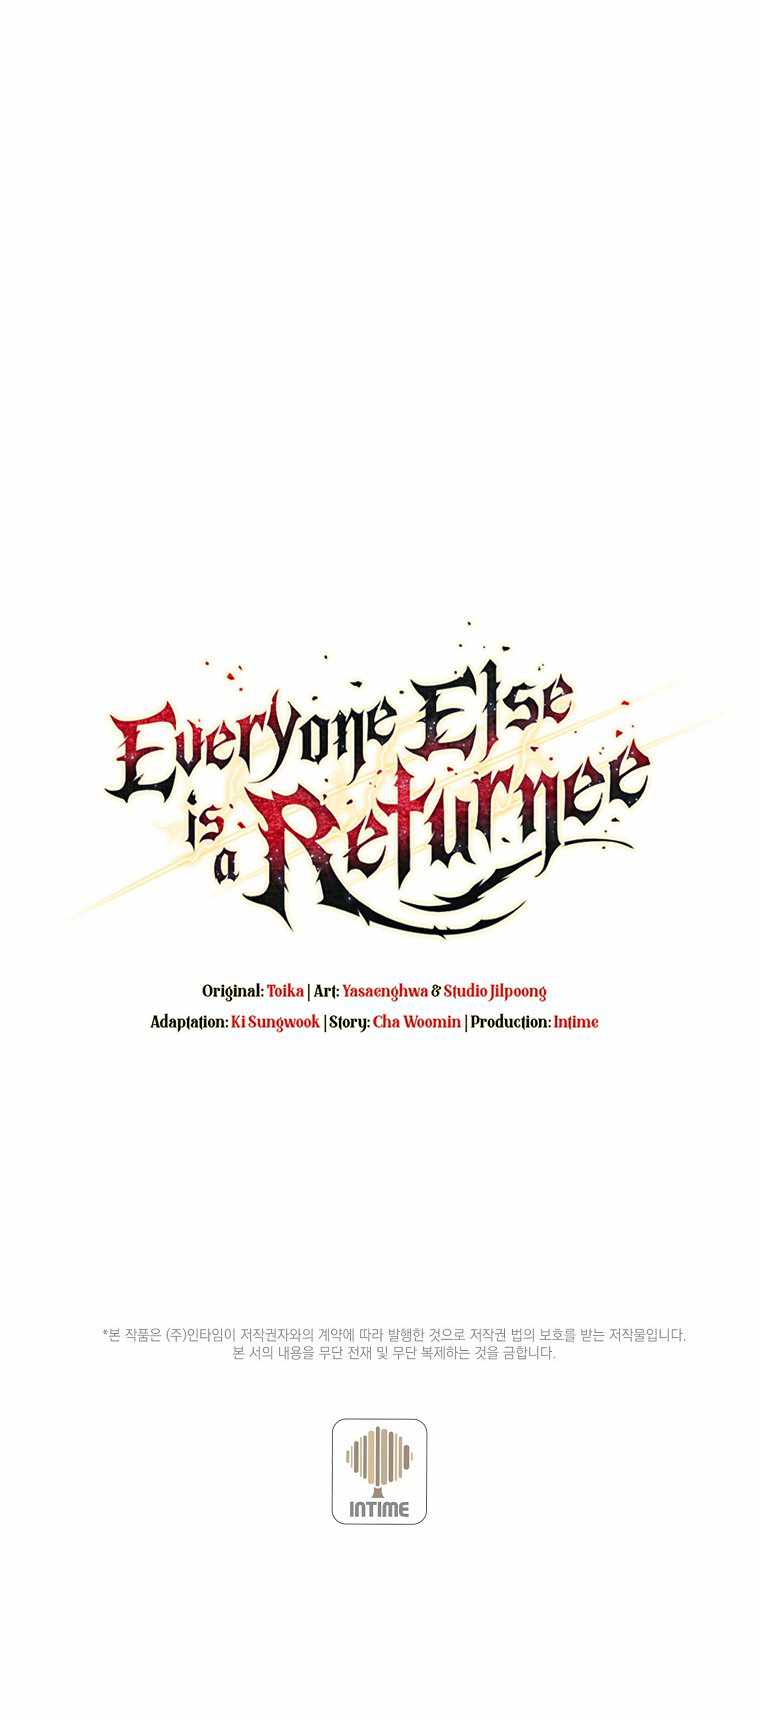 Everyone else is a Returnee chapter 1